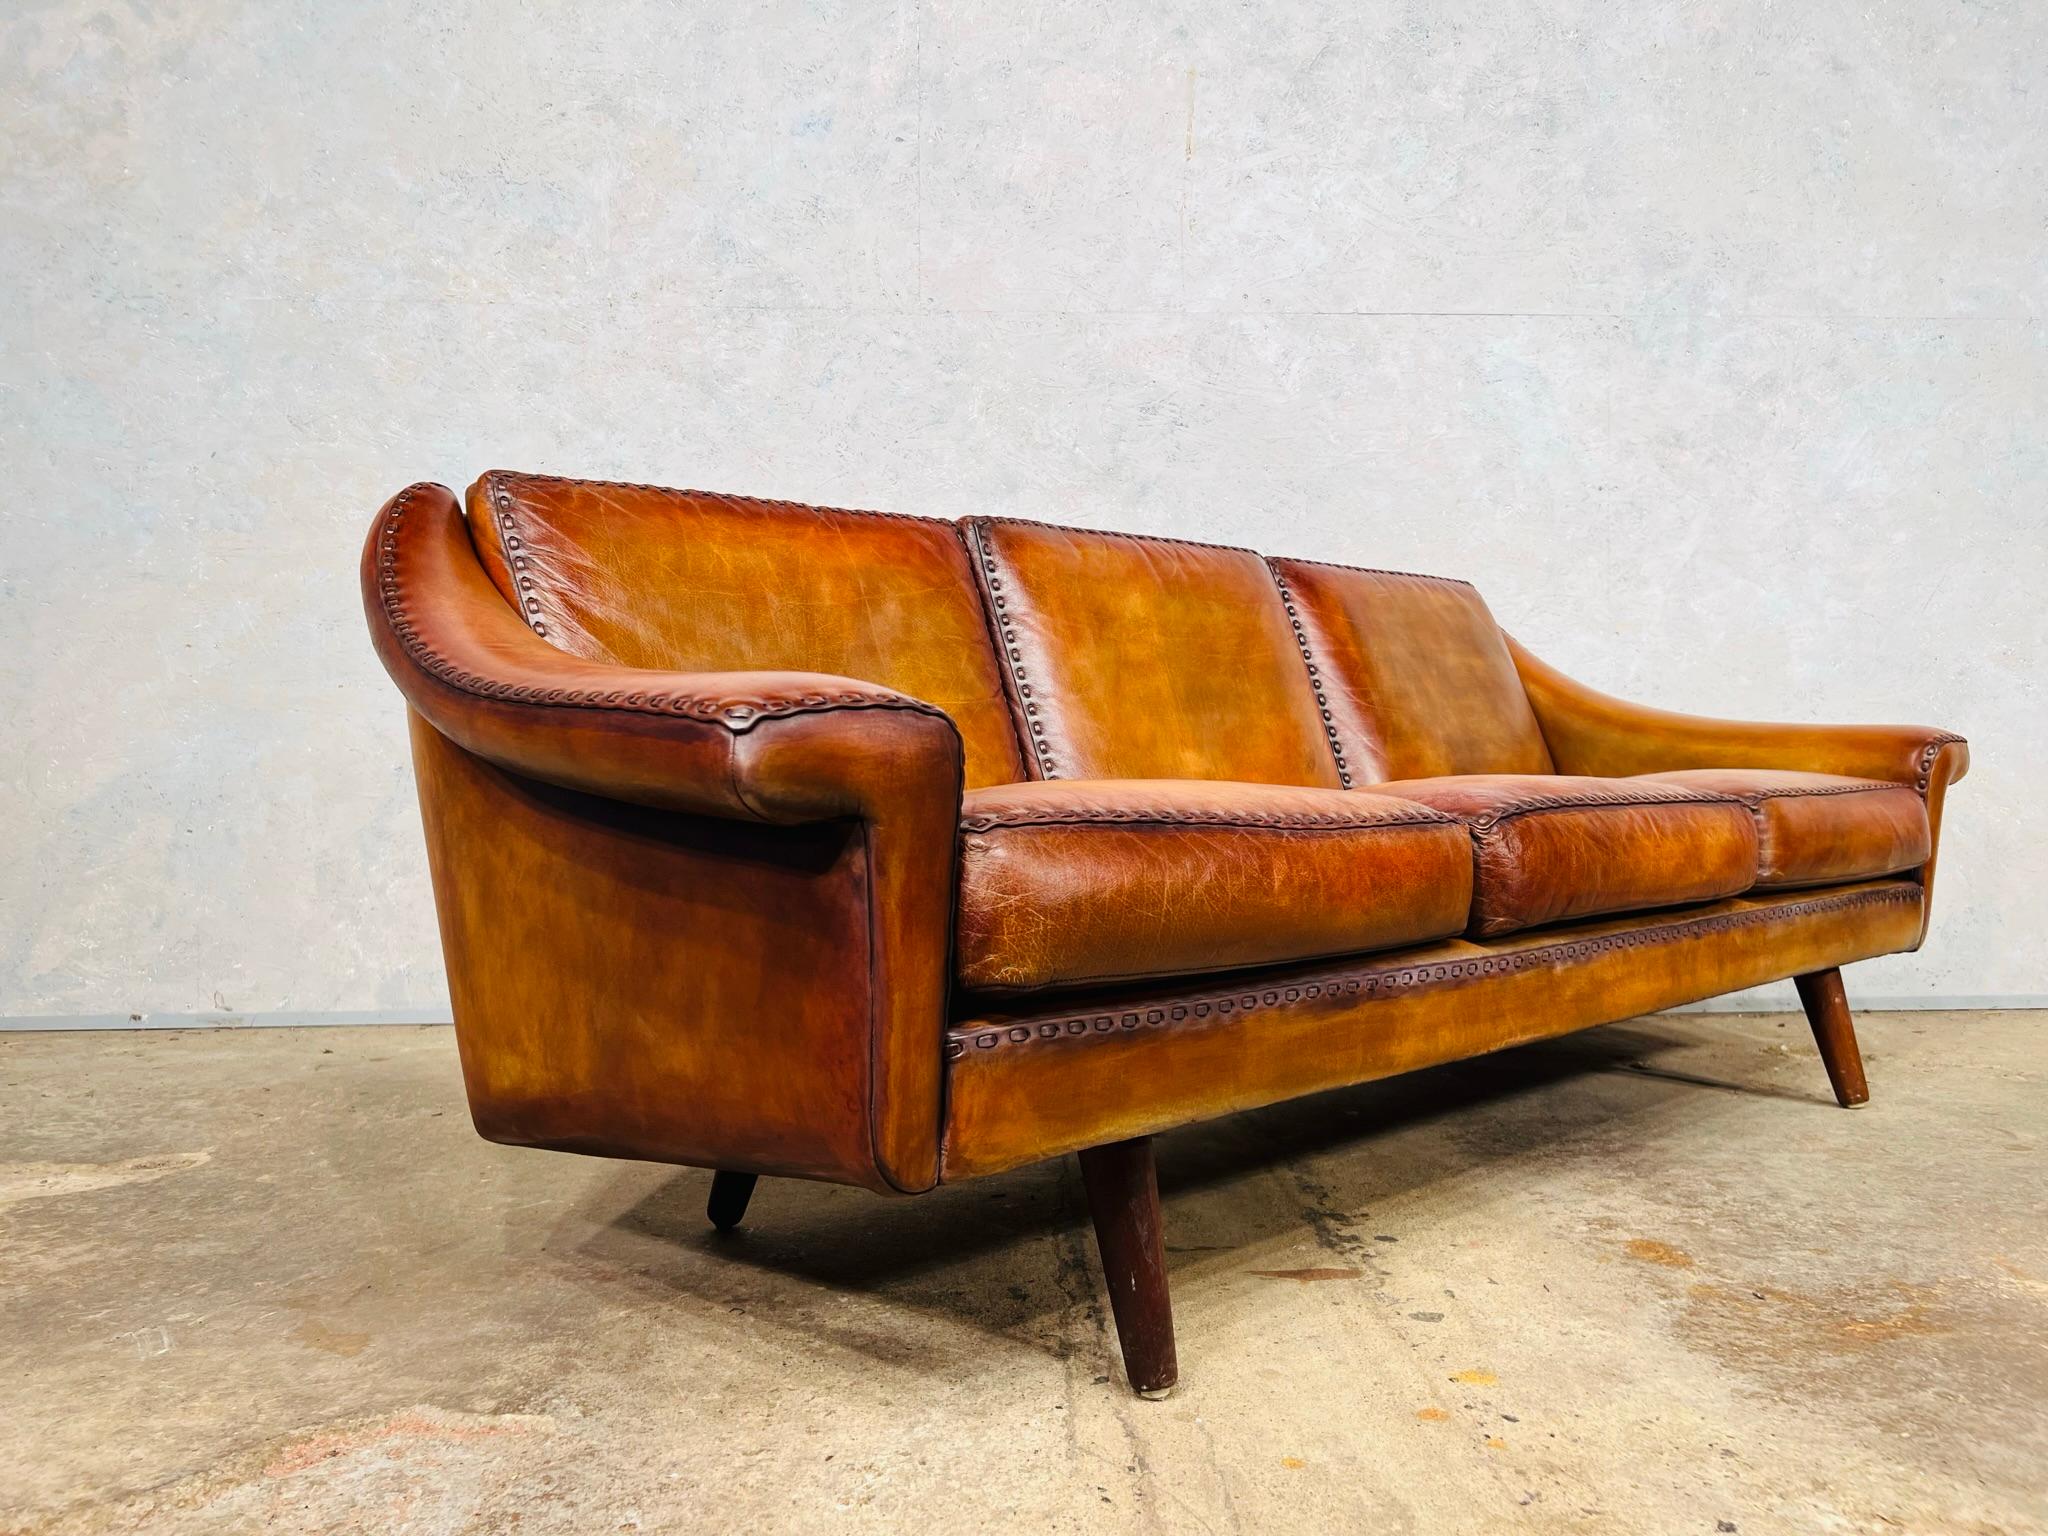 Matador Leather 3 Seater Sofa by Aage Christiansen for Eran 1960s #642 In Good Condition For Sale In Lewes, GB